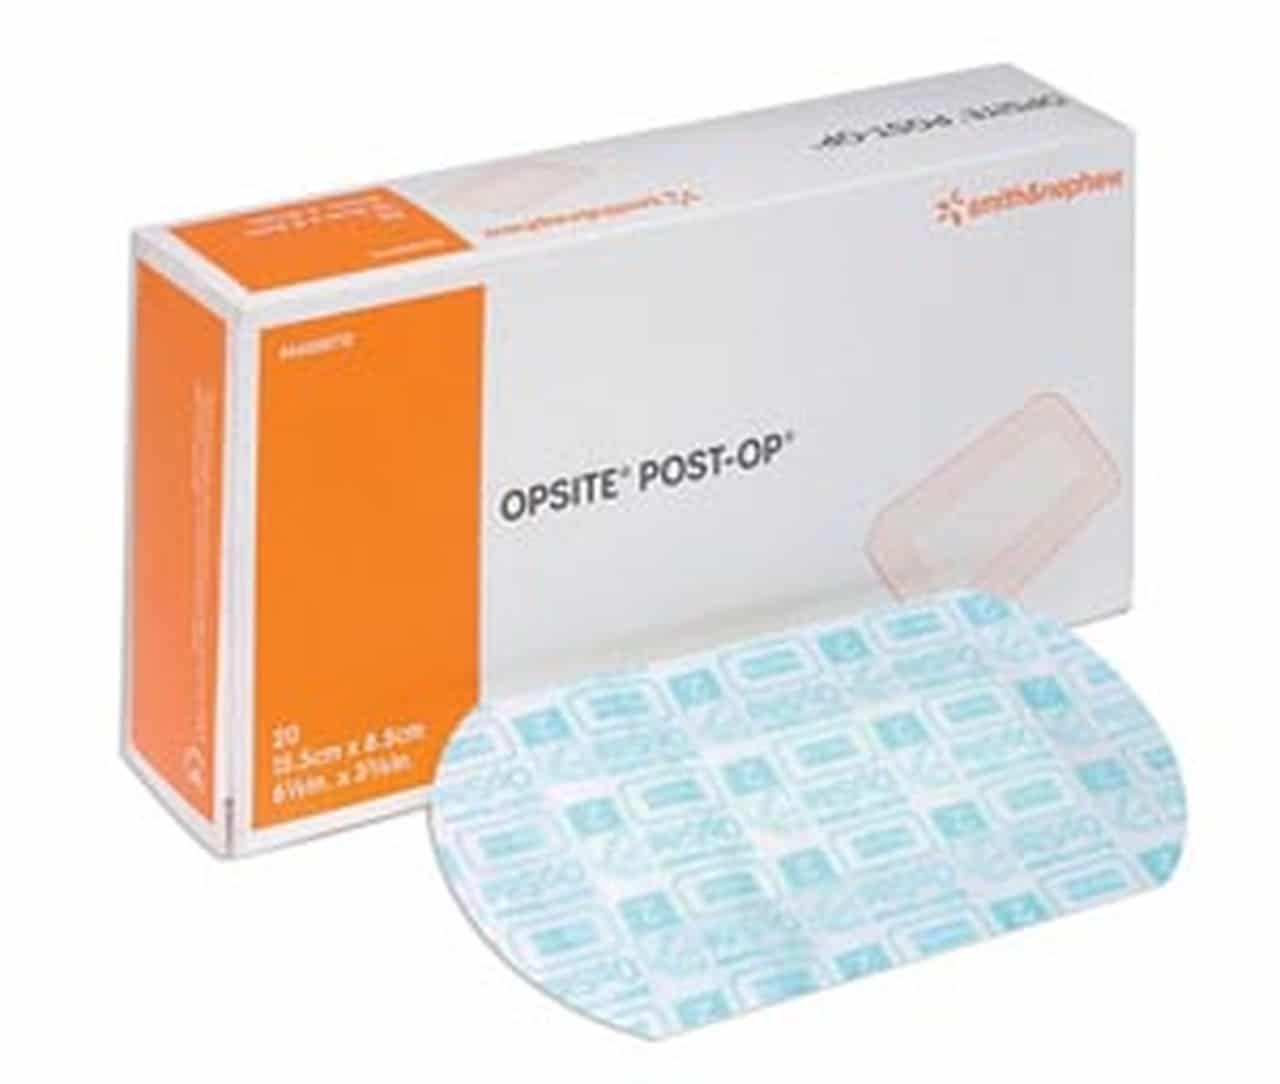 Smith & Nephew Opsite Post-Op Dressing Box of 100 Canada